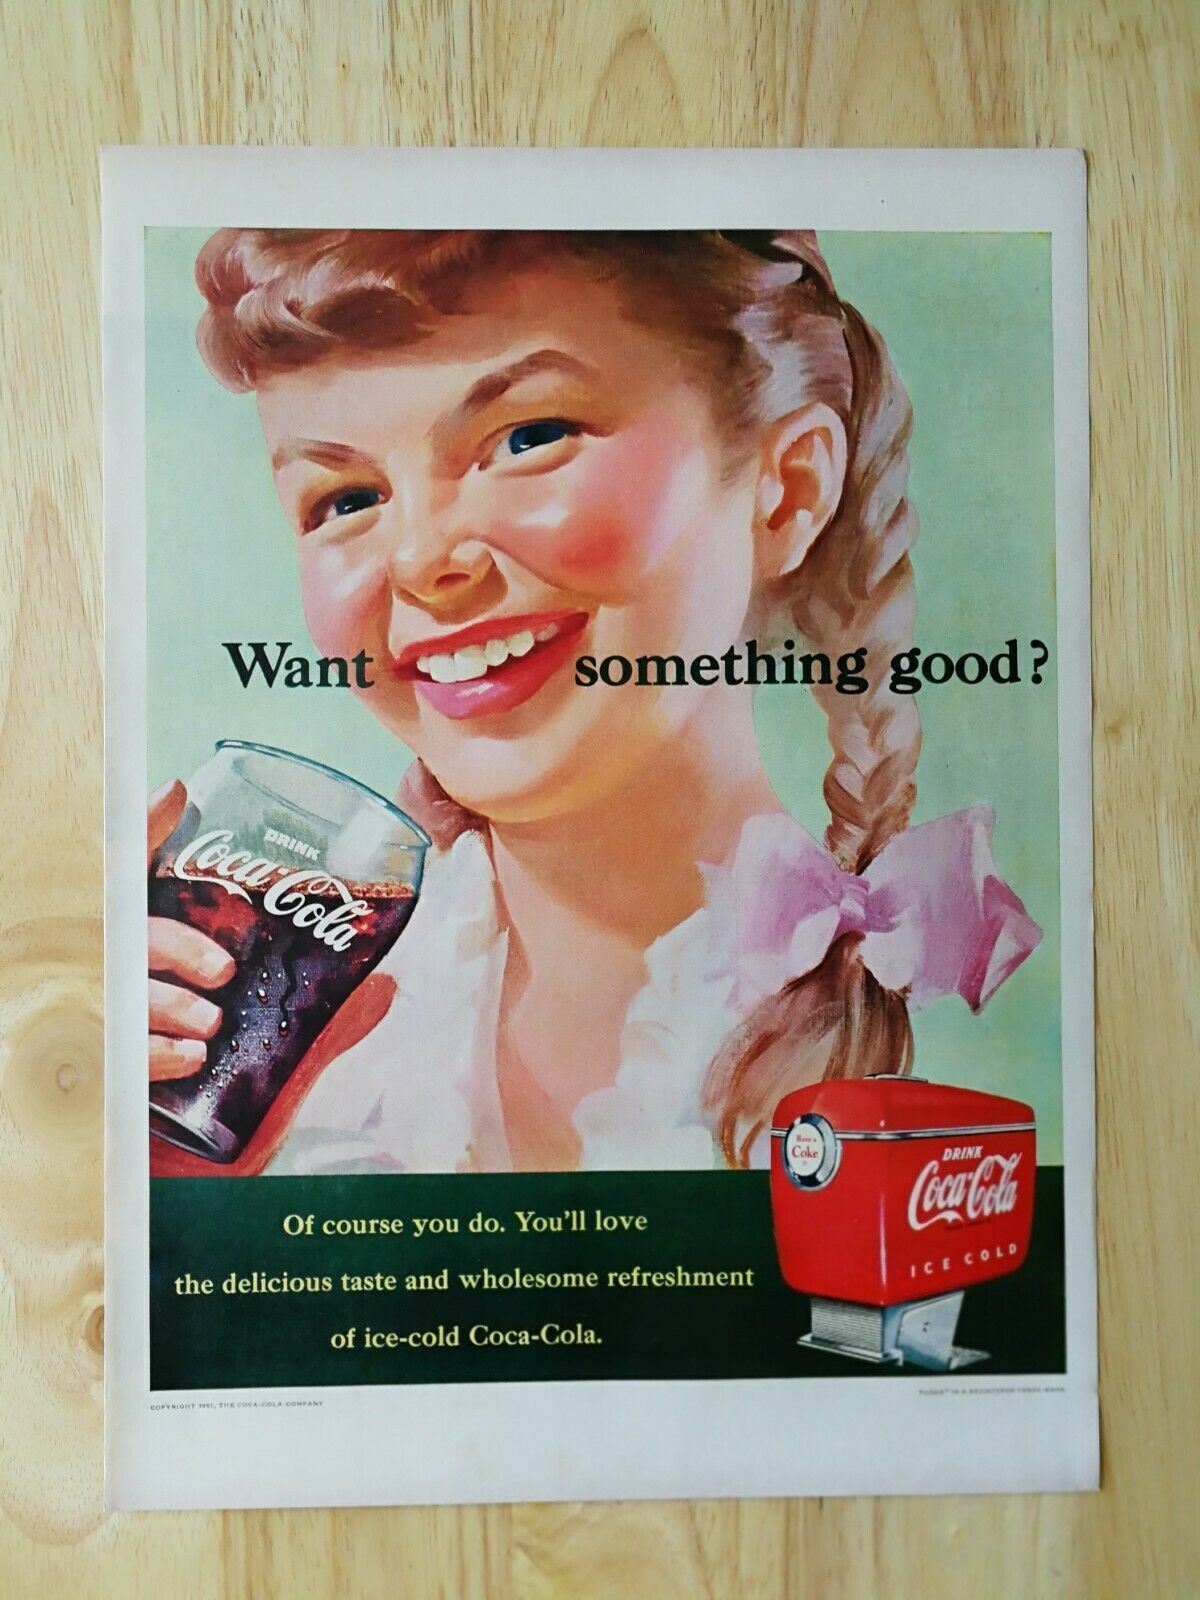 Primary image for Vintage 1951 Coca-Cola Girl Smiling Full Page Original Color Ad  921